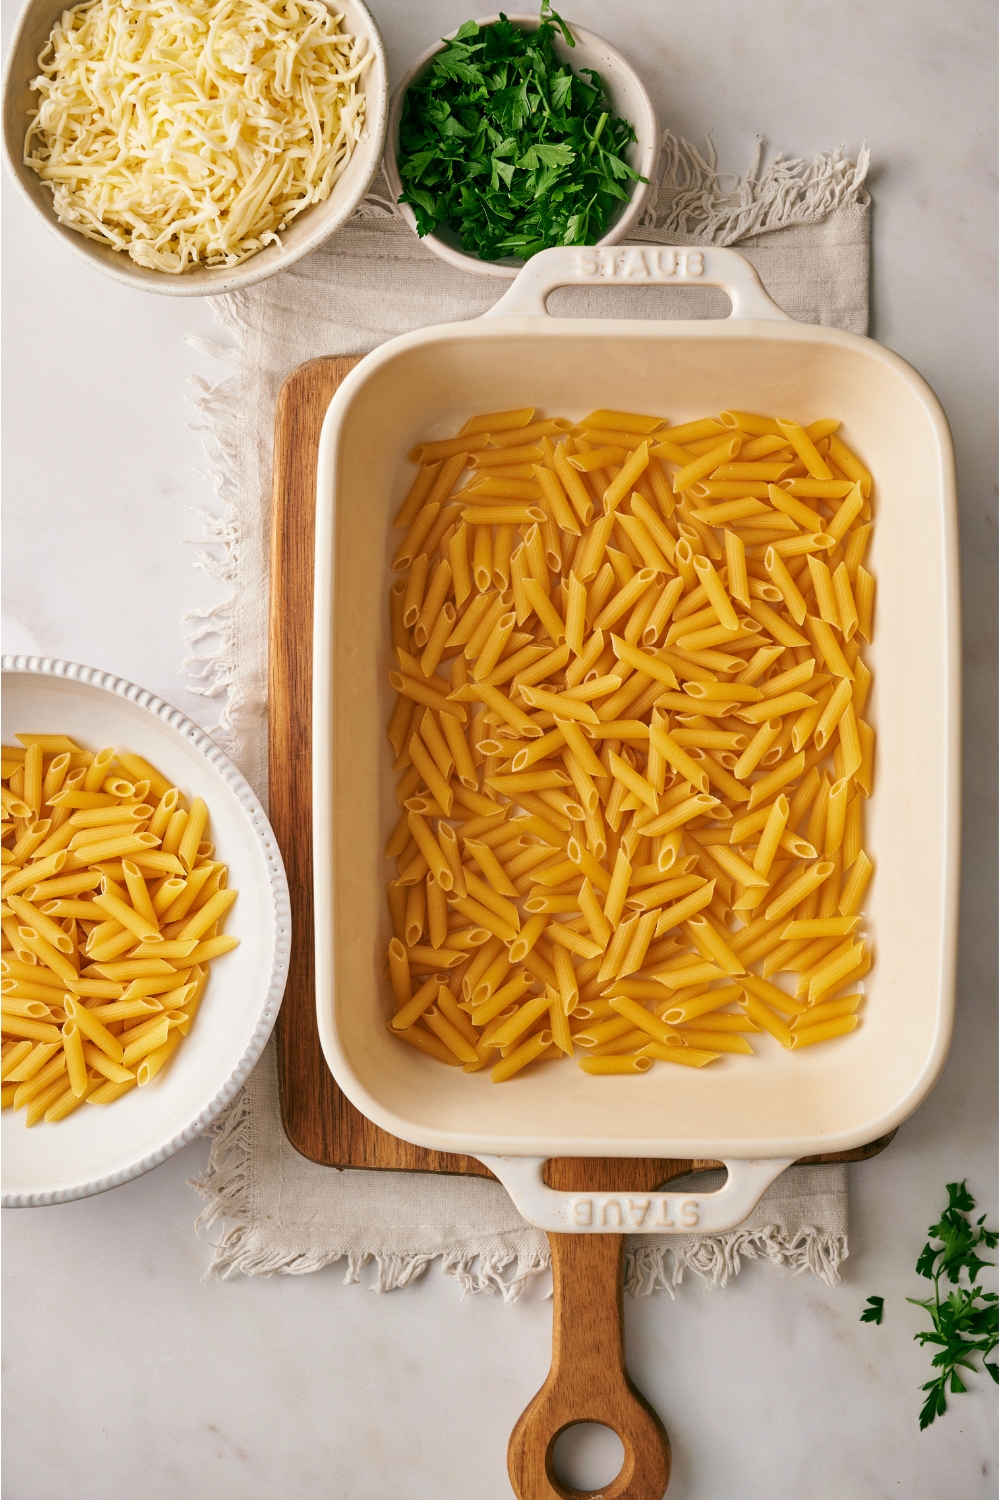 A white baking dish filled with dried penne pasta, next to bowls of dried pasta, shredded cheese, and fresh green herbs.